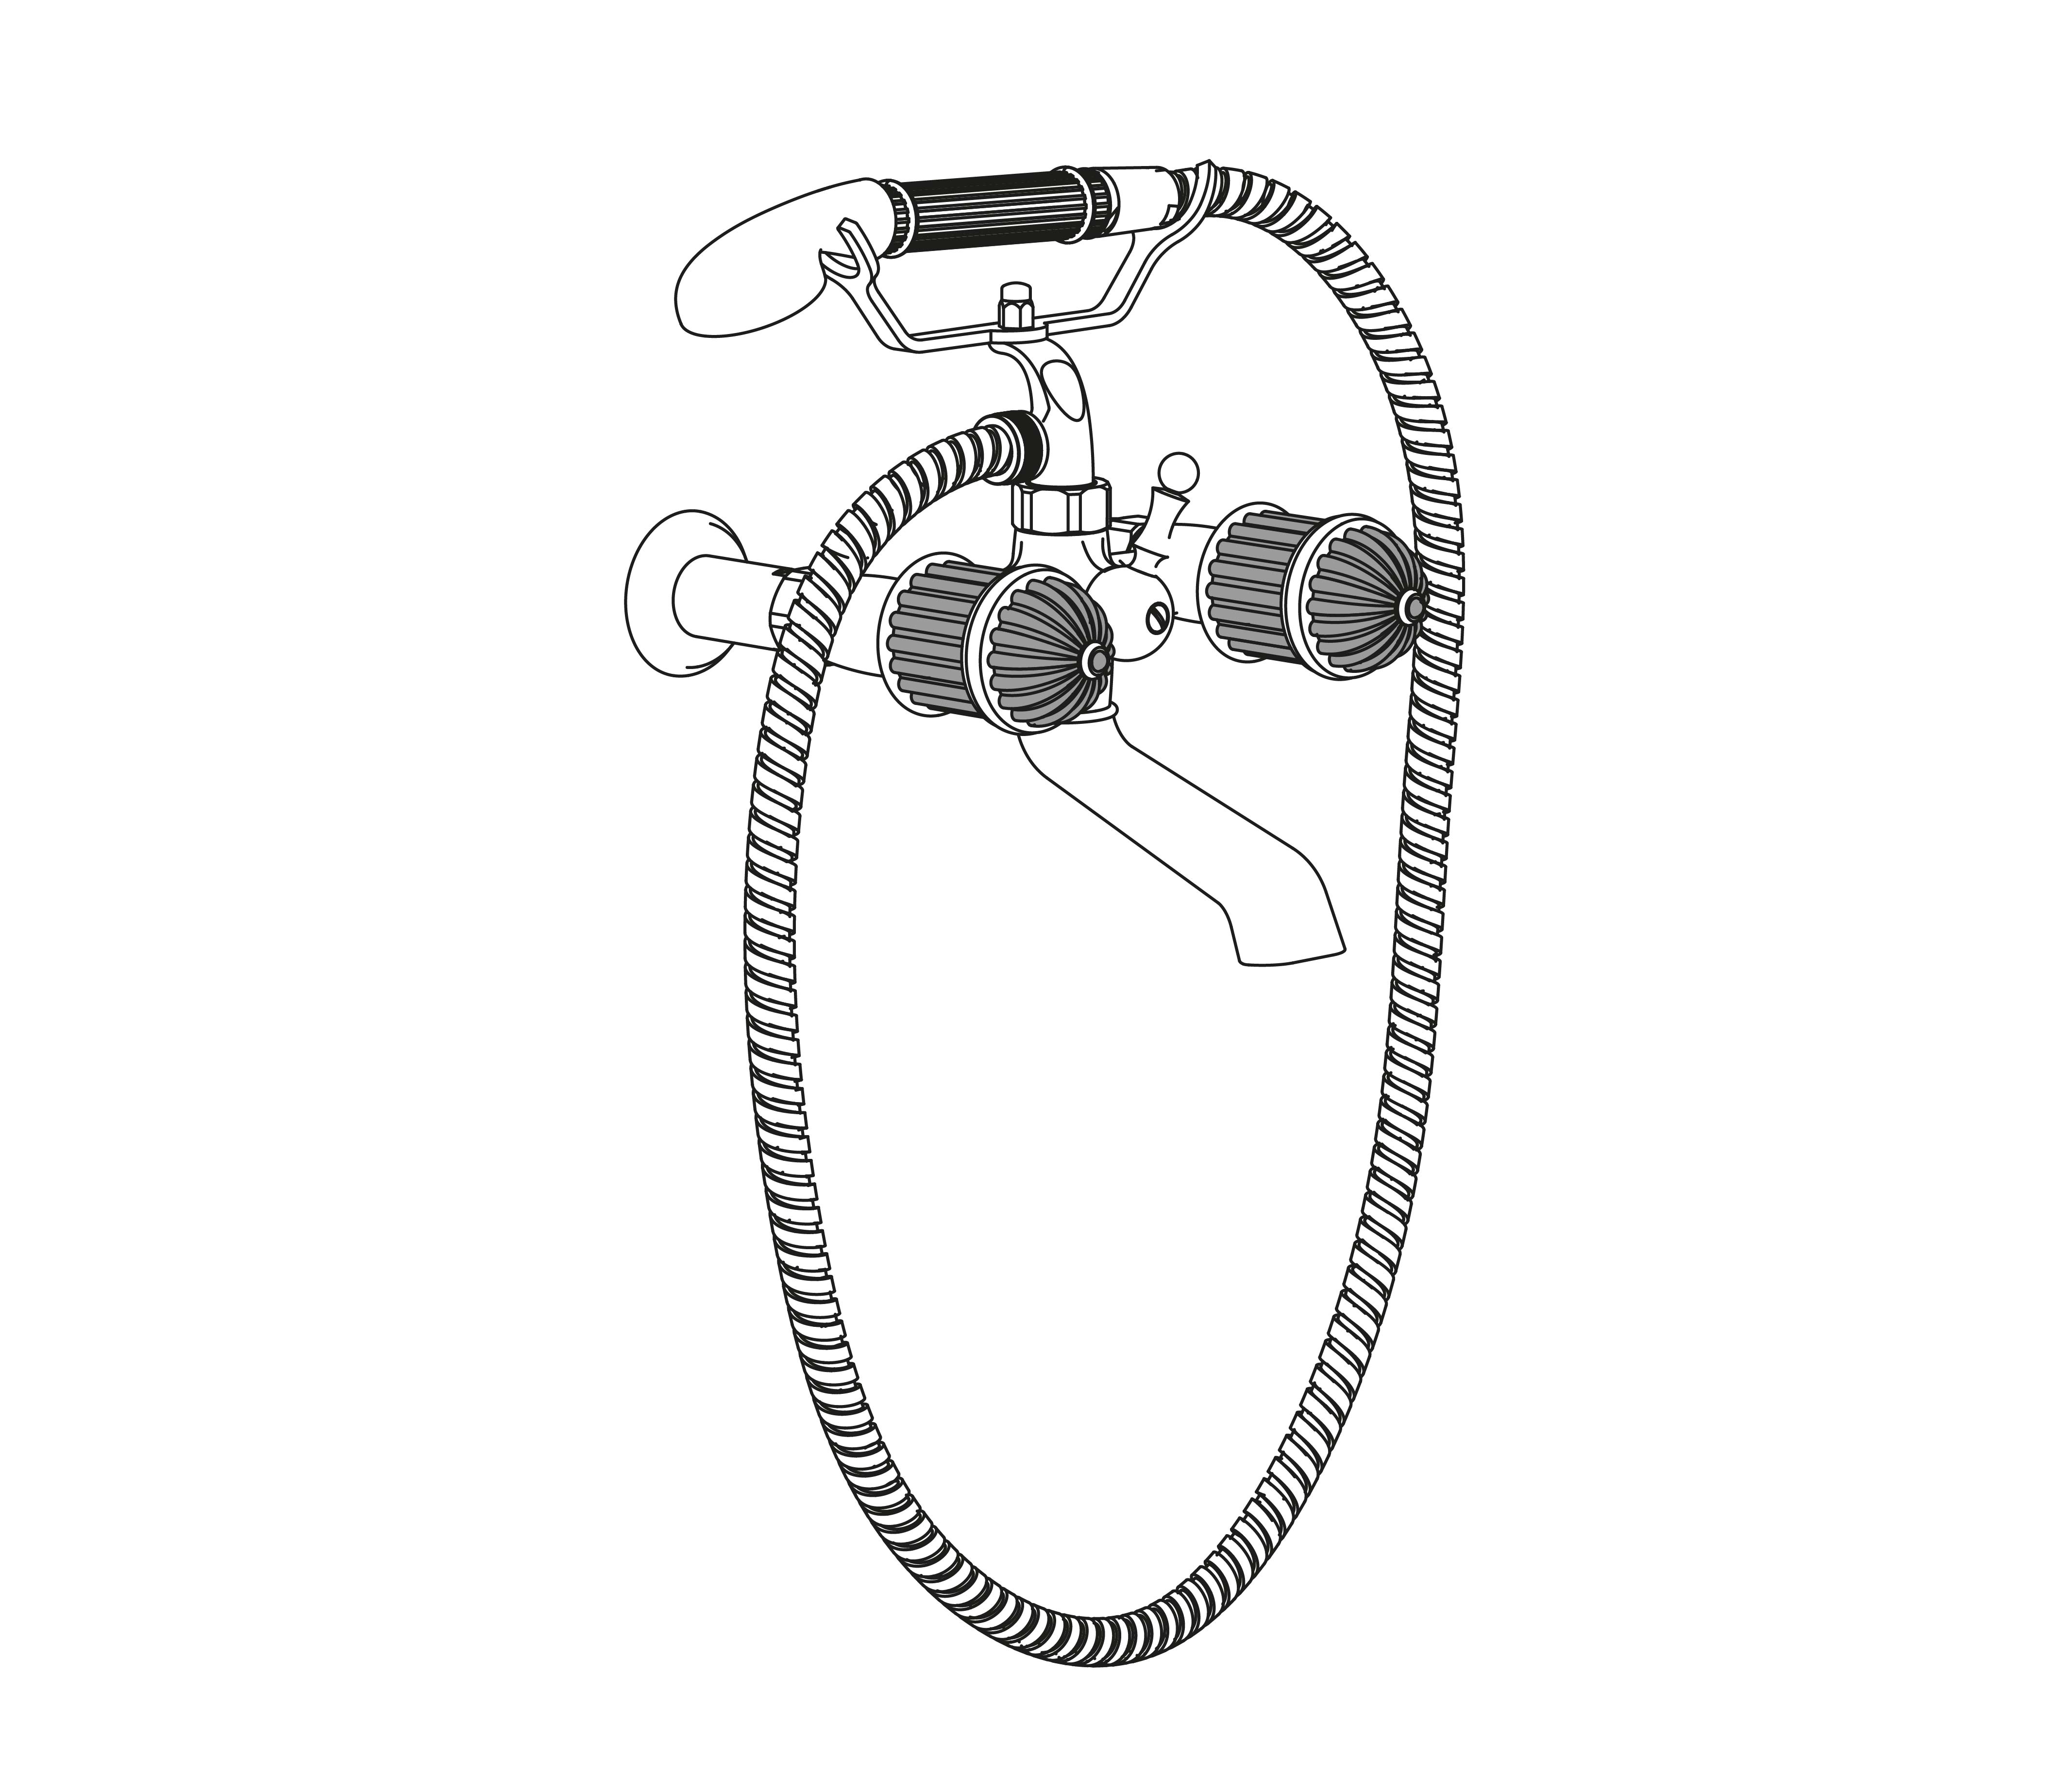 S189-3201 Wall mounted bath and shower mixer